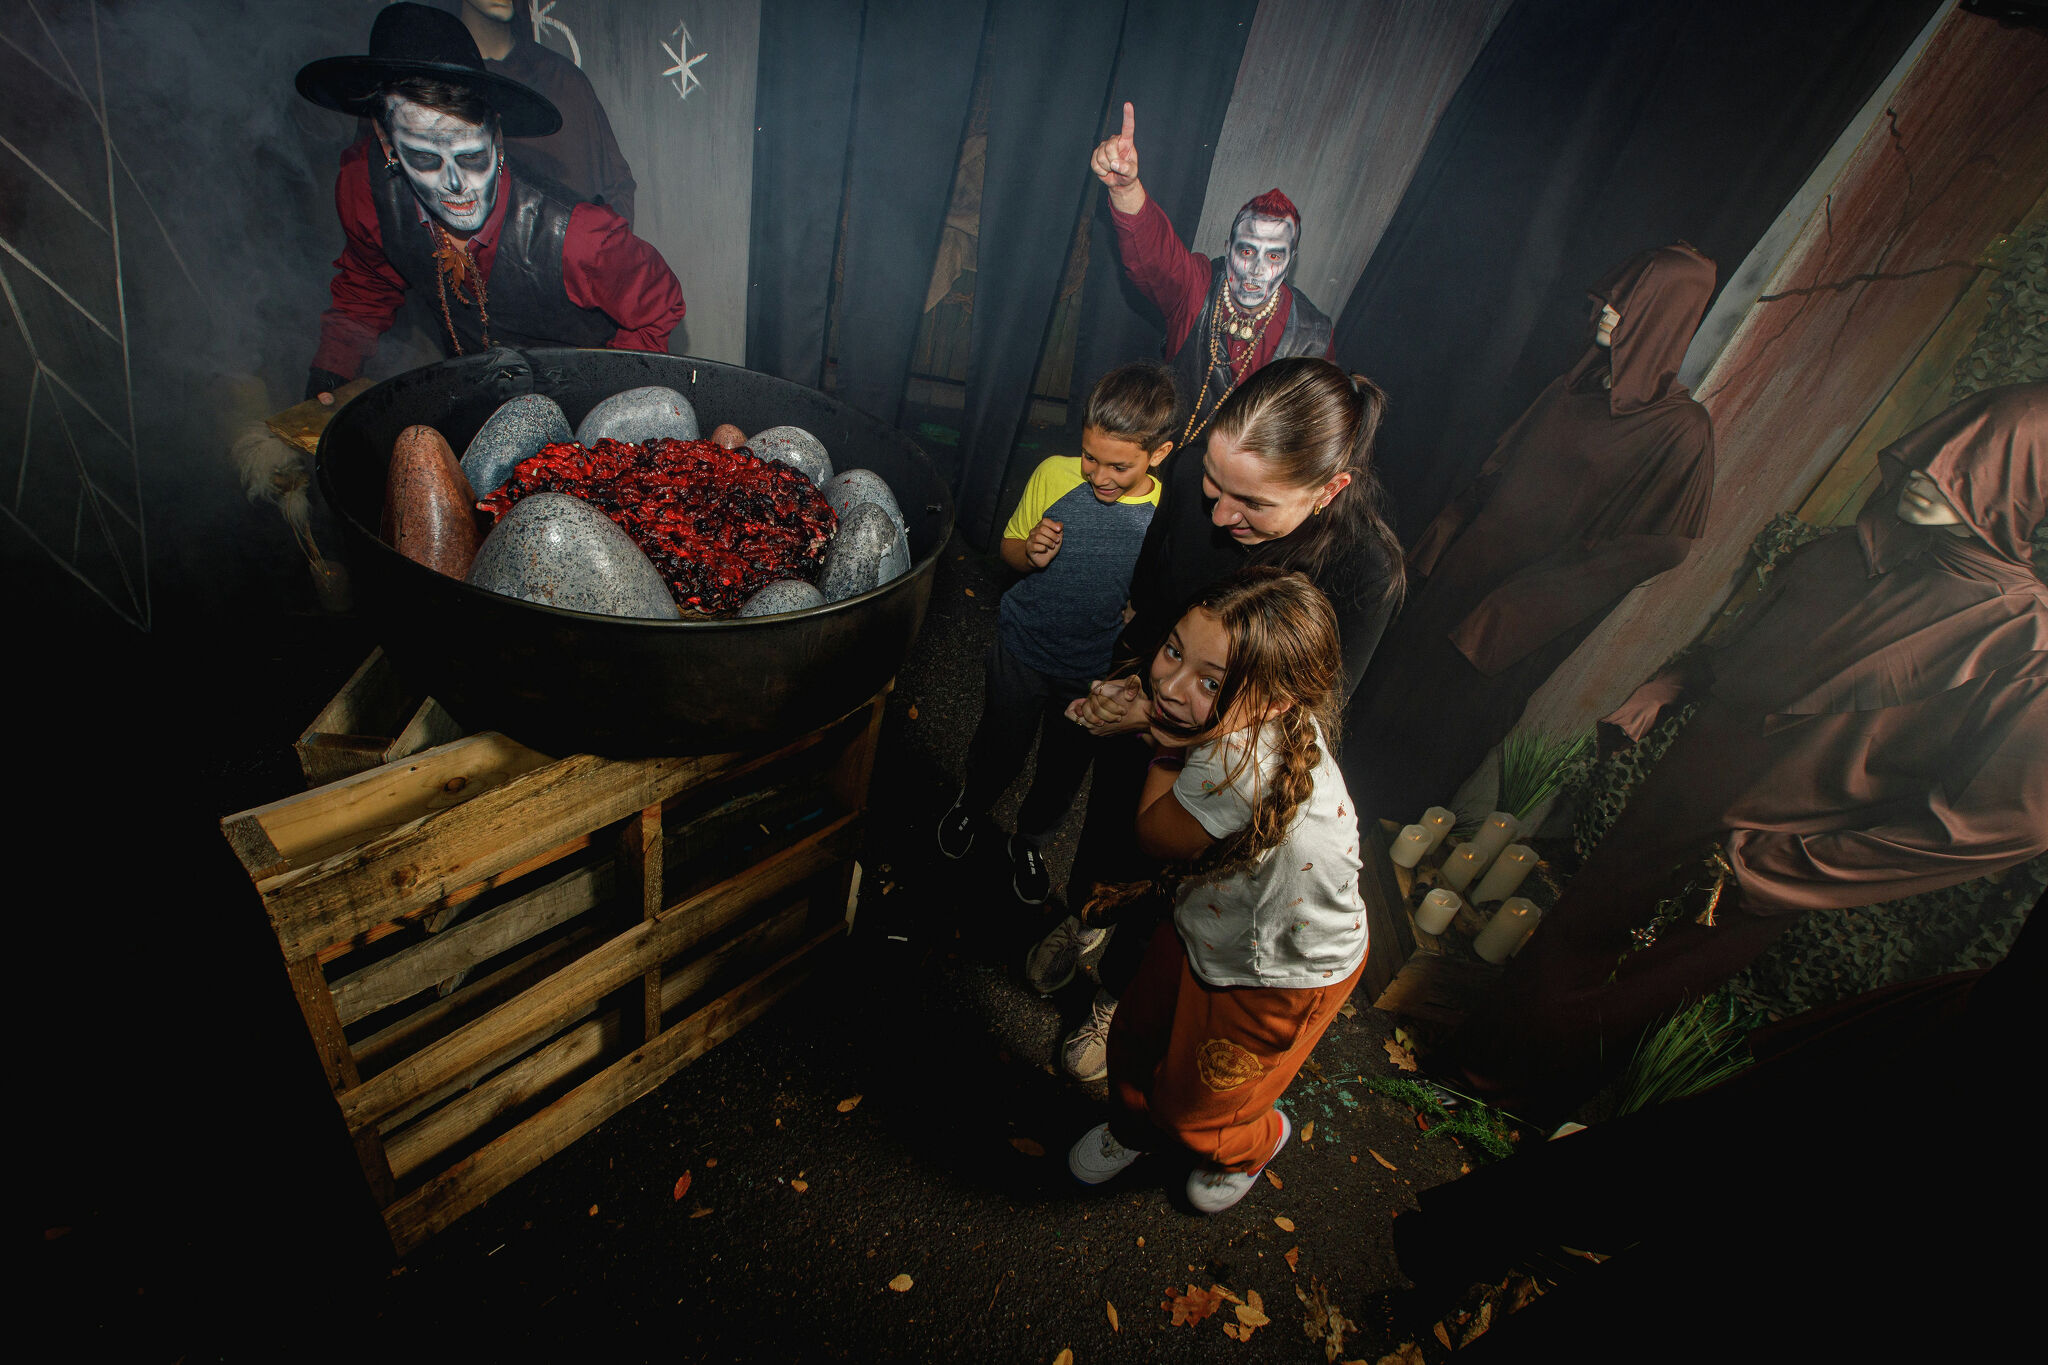 Legends of Fear Haunted House – The Spectrum Newspaper